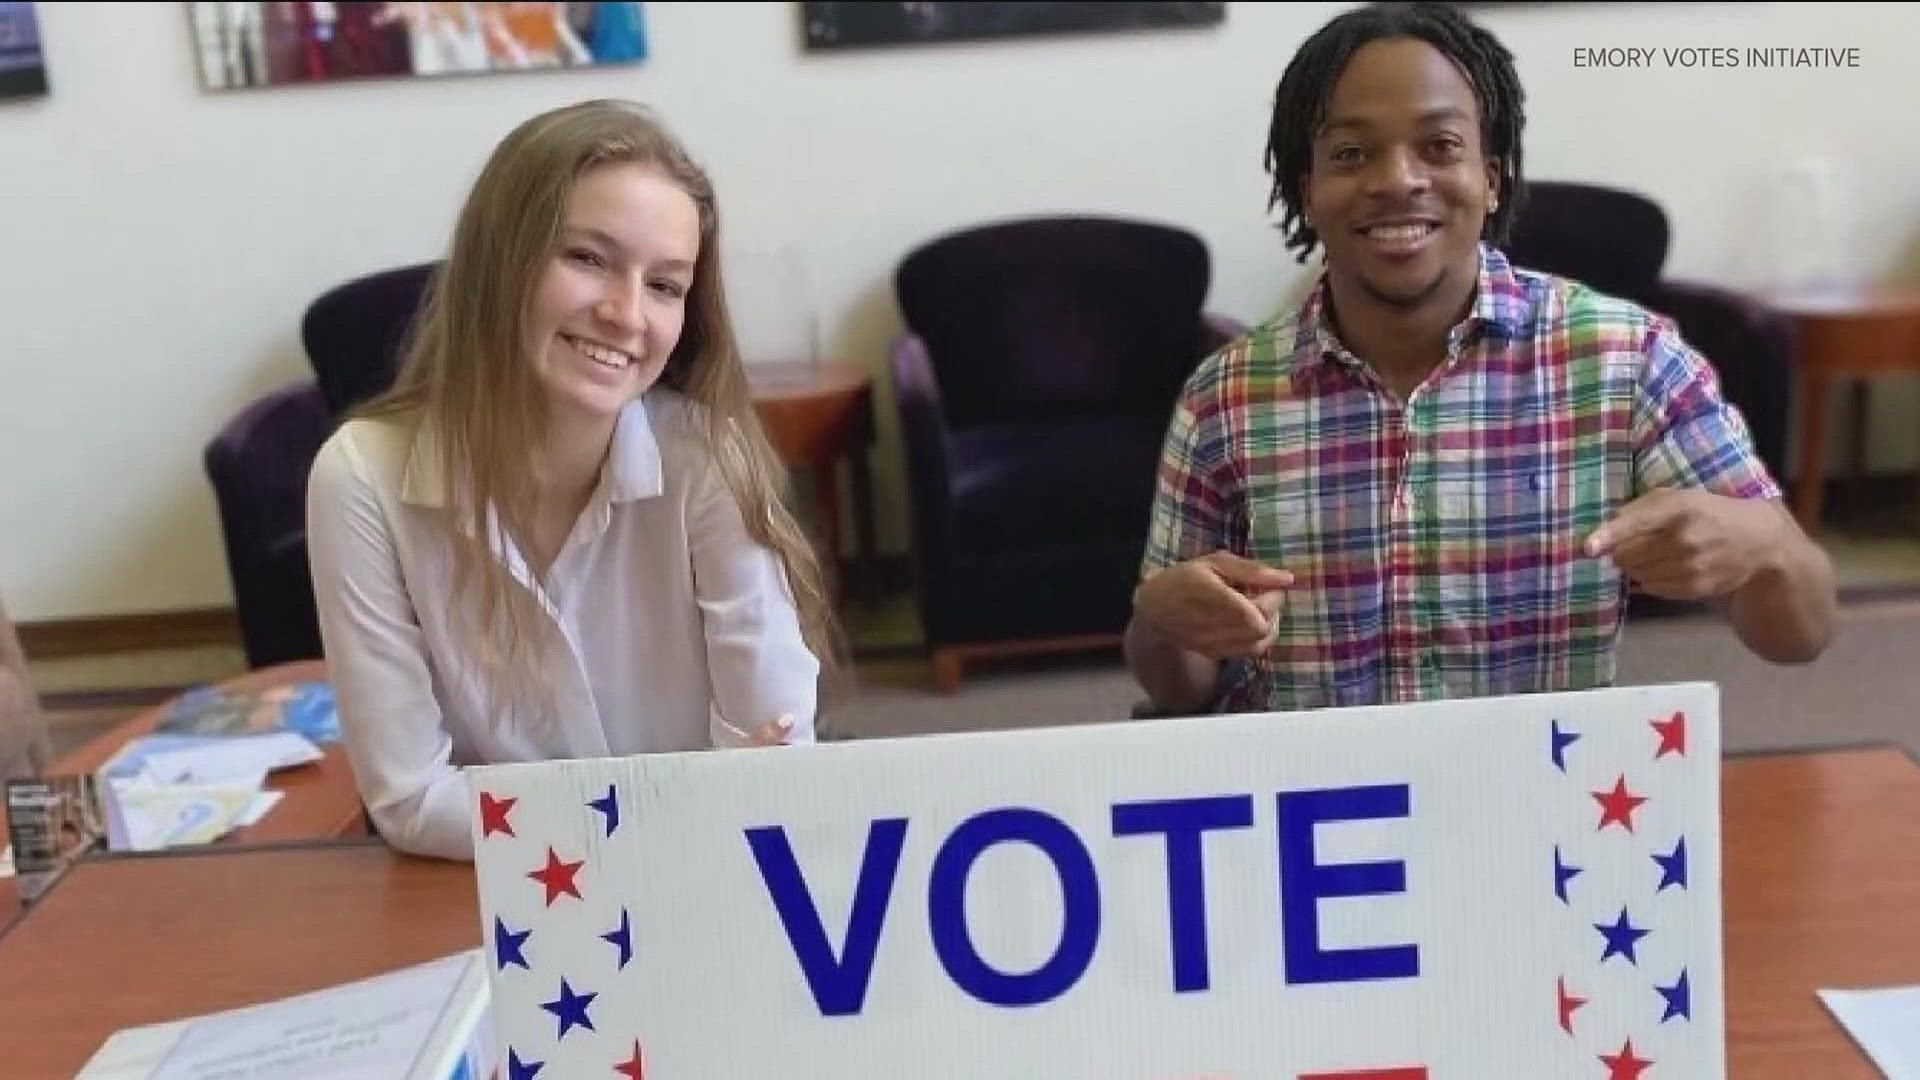 Events are happening on college campuses encouraging students to head out and cast their ballot.